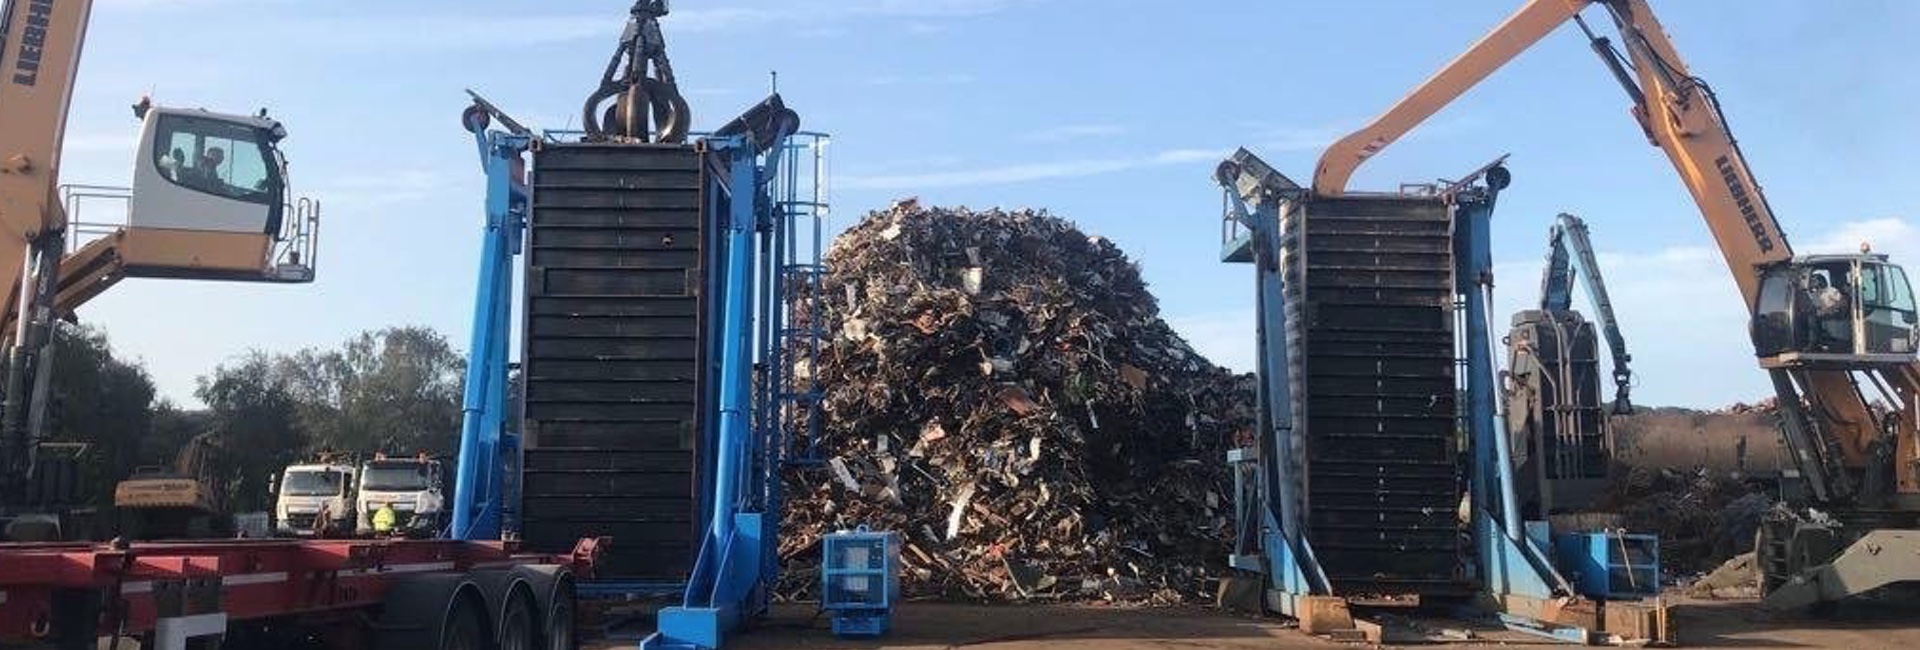 Two shipping containers being loaded with Ferrous and Non Ferrous metal